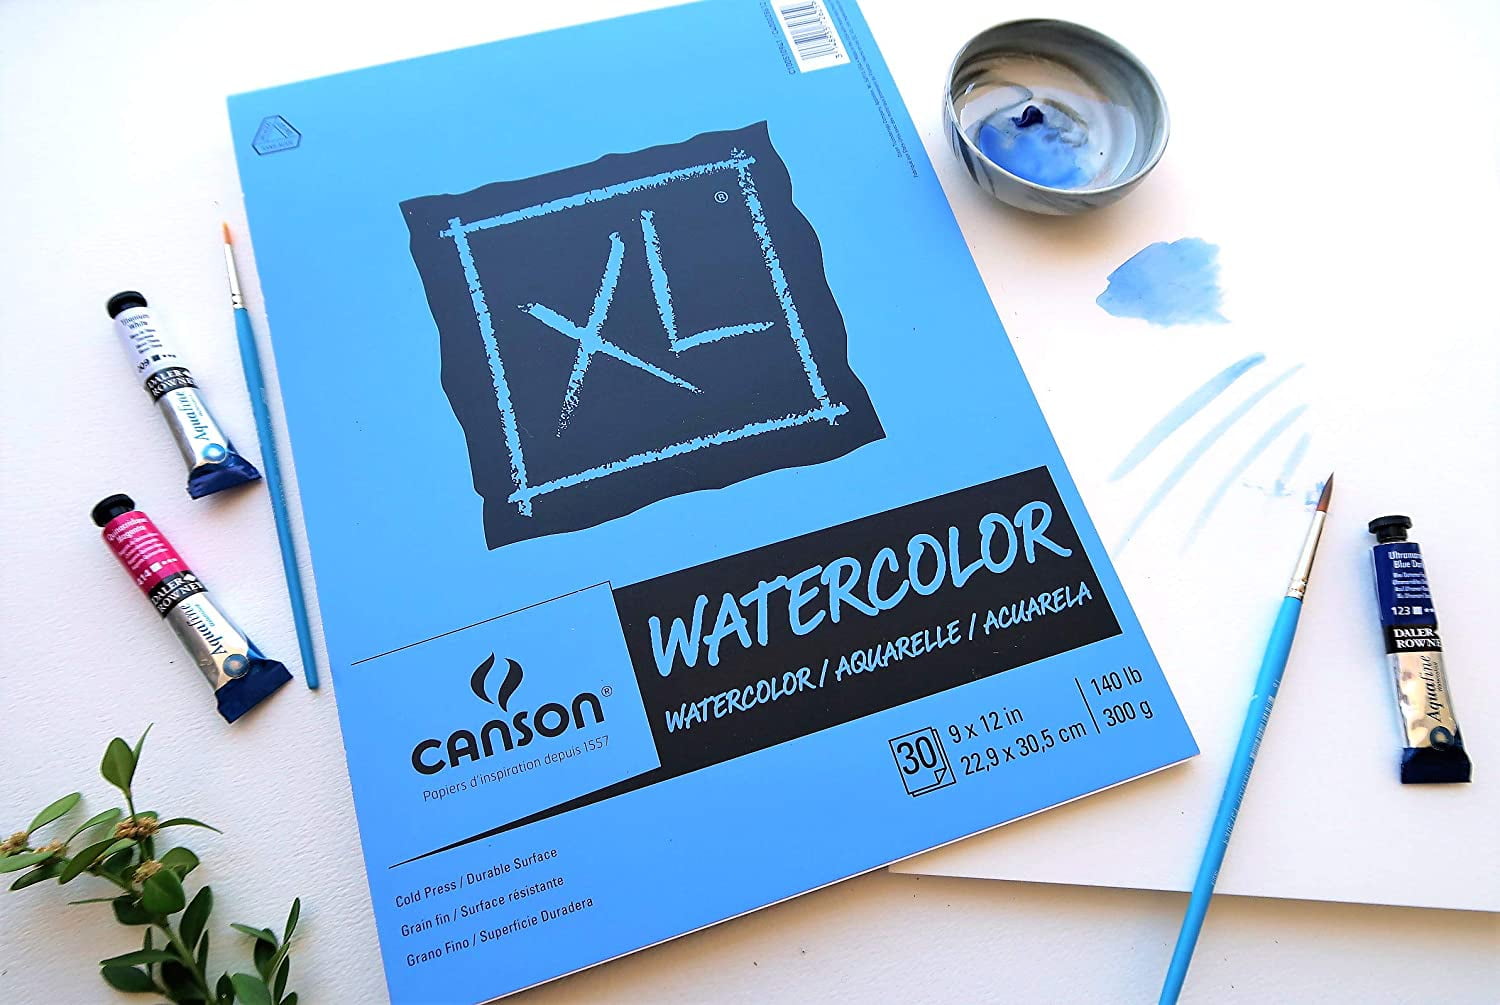 Canson XL Marker Pad 100 Sheets 9 x 12